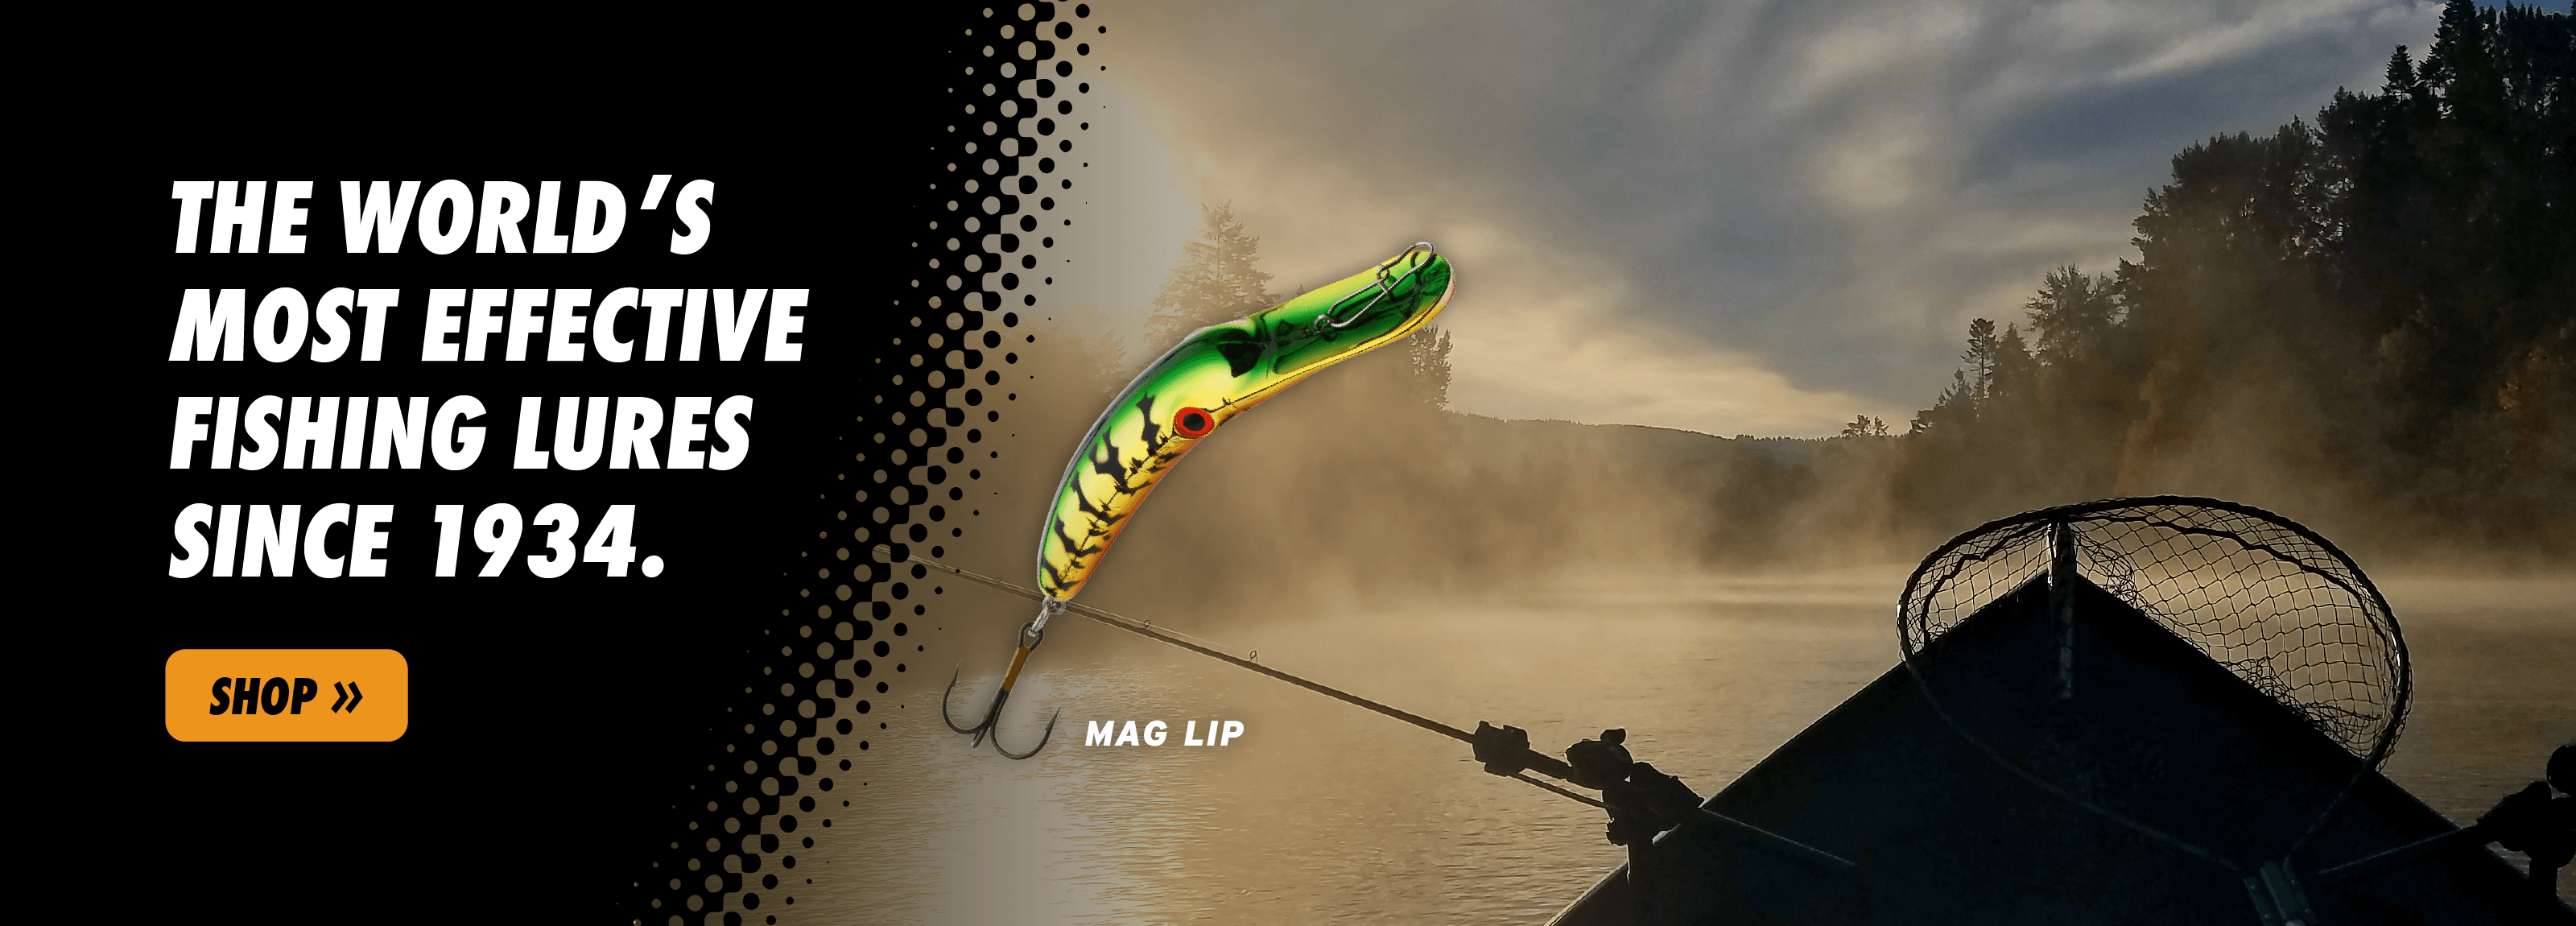 World;s Most Effective Fishing Lures since 1934 - Maglip